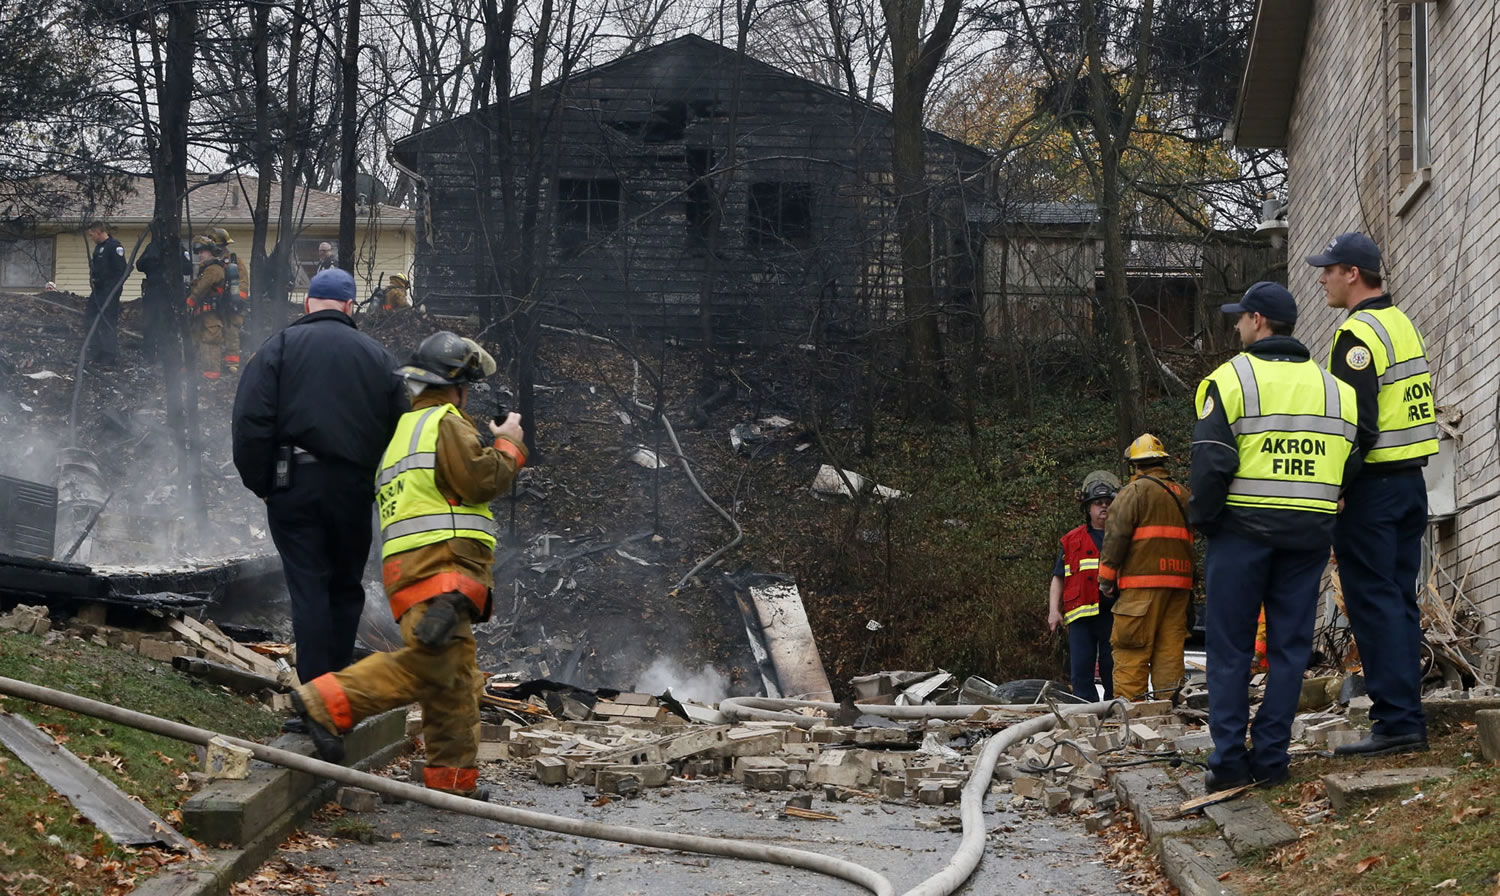 Police and firefighters work at the scene where authorities say a small business jet crashed into an apartment building in Akron, Ohio, on Tuesday. Investigators were trying to determine how many people were on the 10-seater jet, but they confirmed two deaths, said Lt. Sierjie Lash, an Akron fire department spokeswoman.